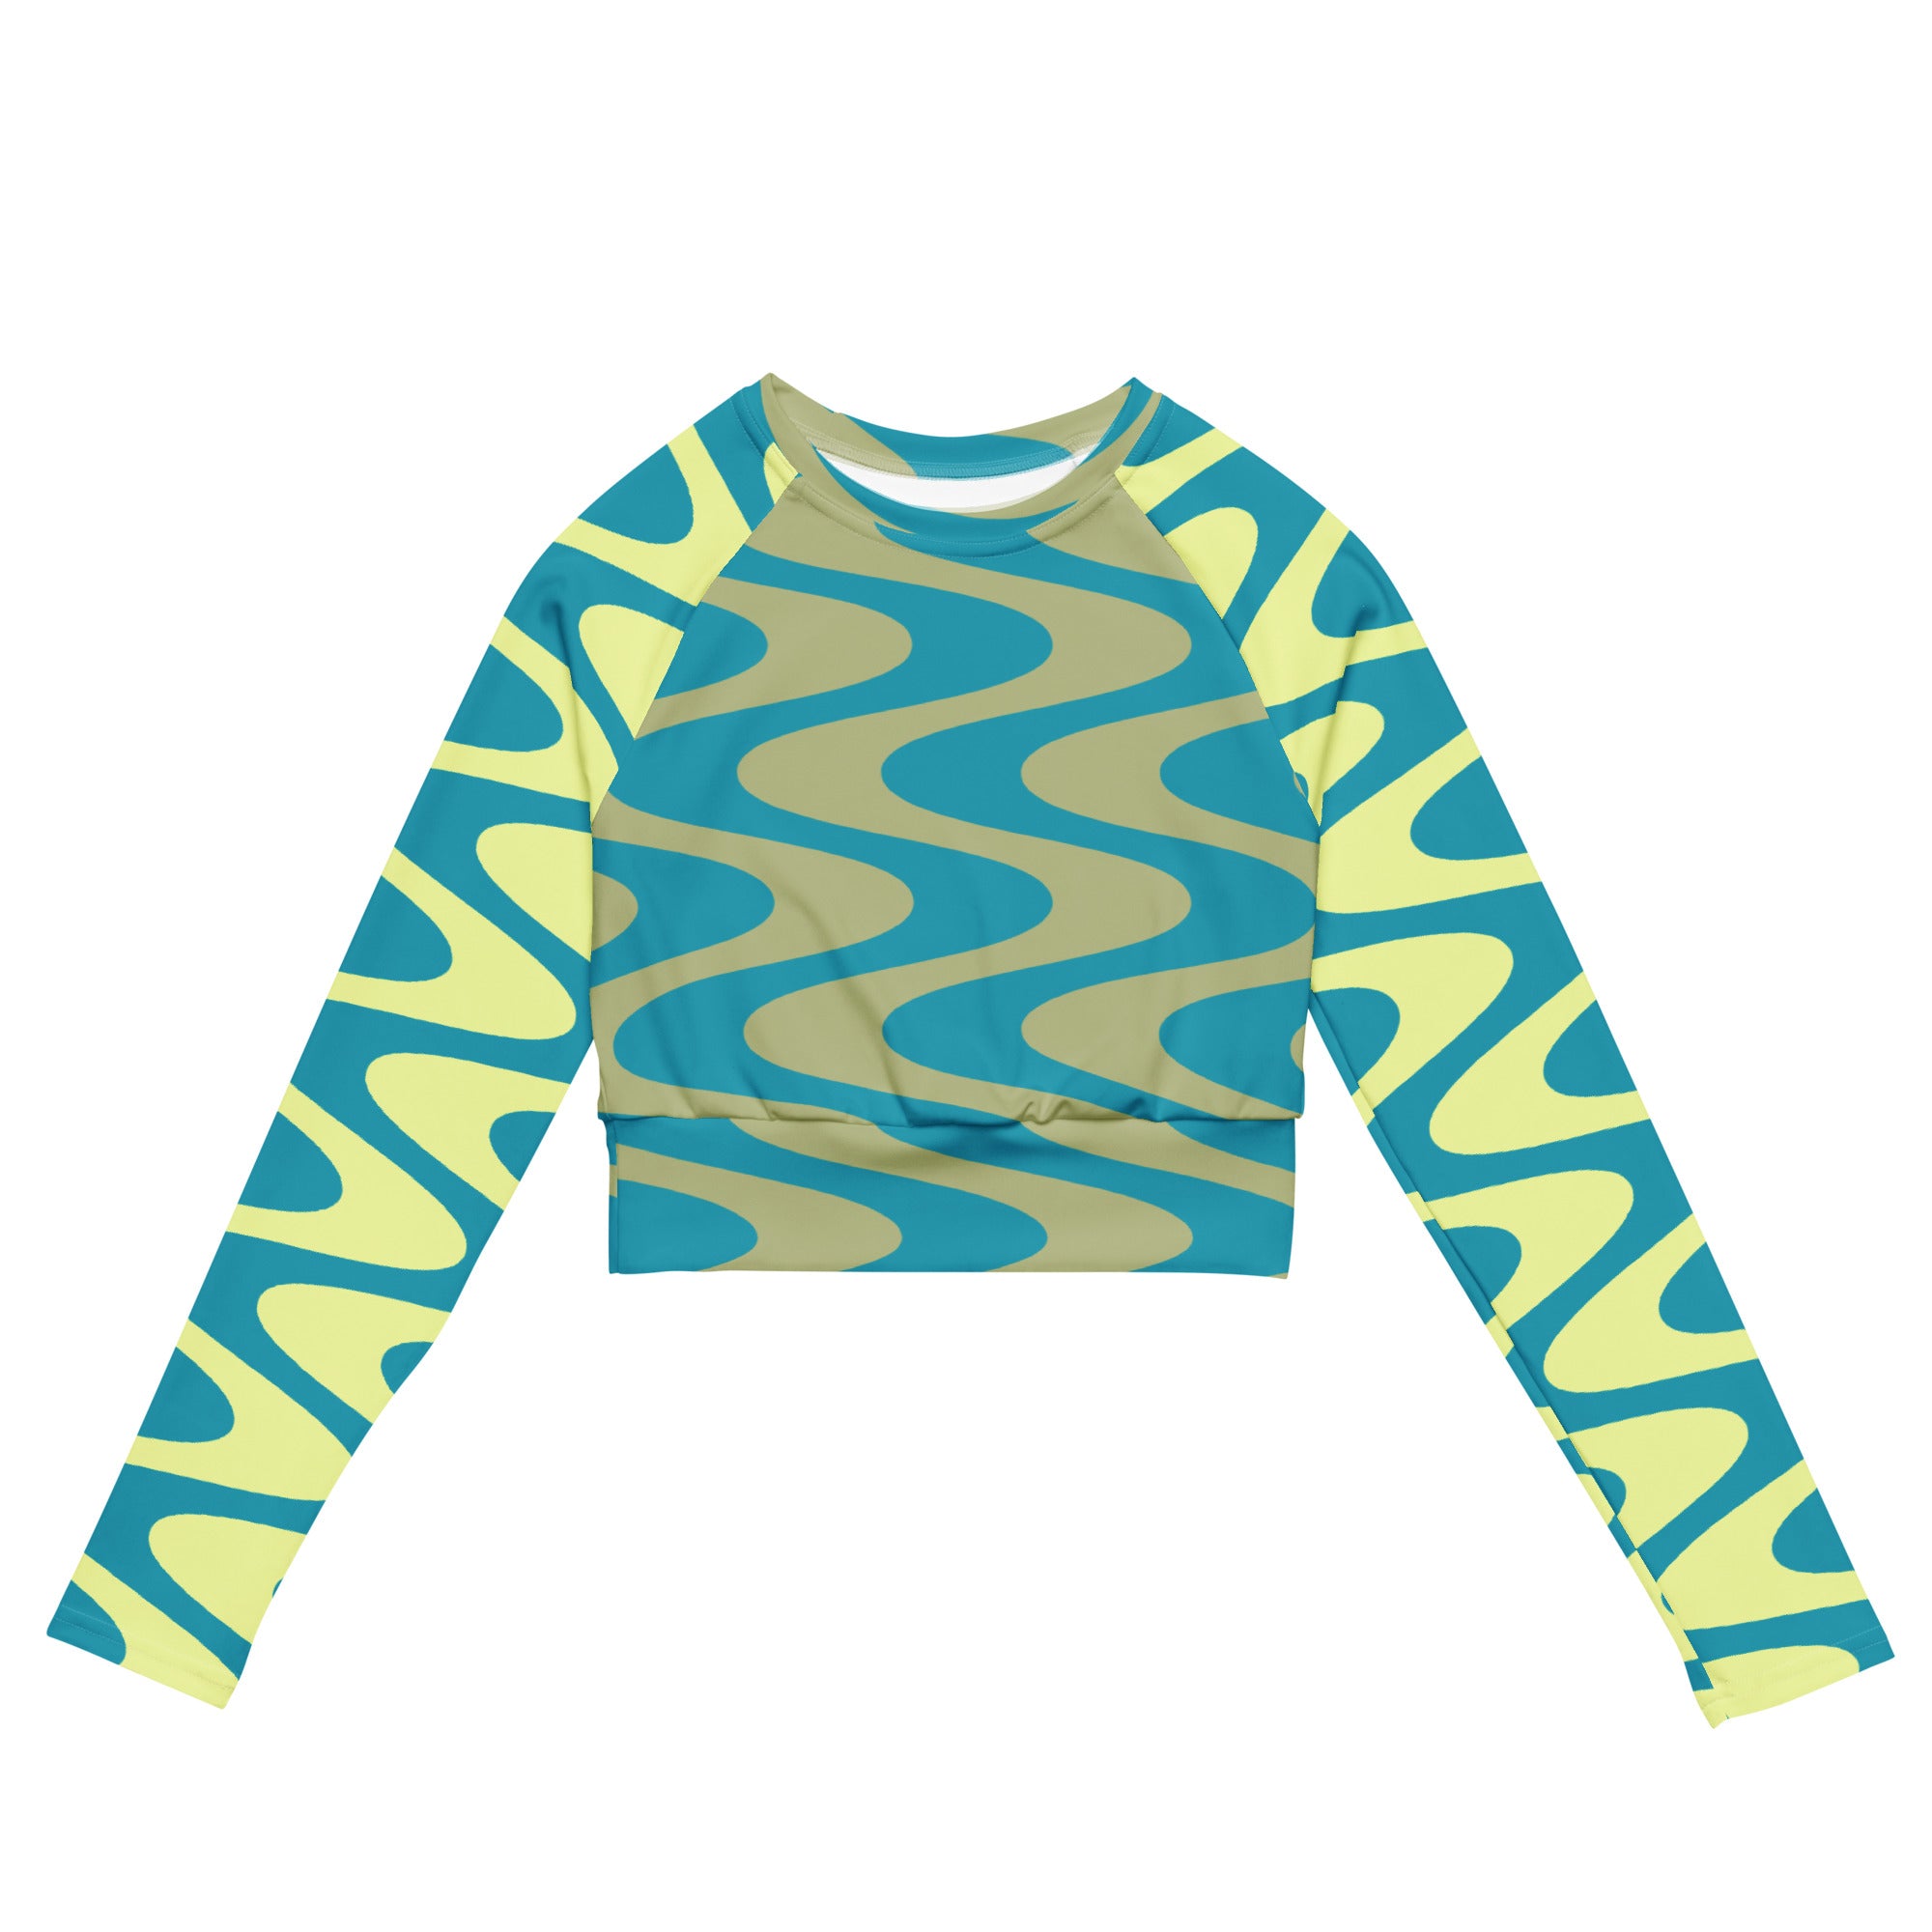 Teal/Lime CYC wave Recycled long-sleeve crop top